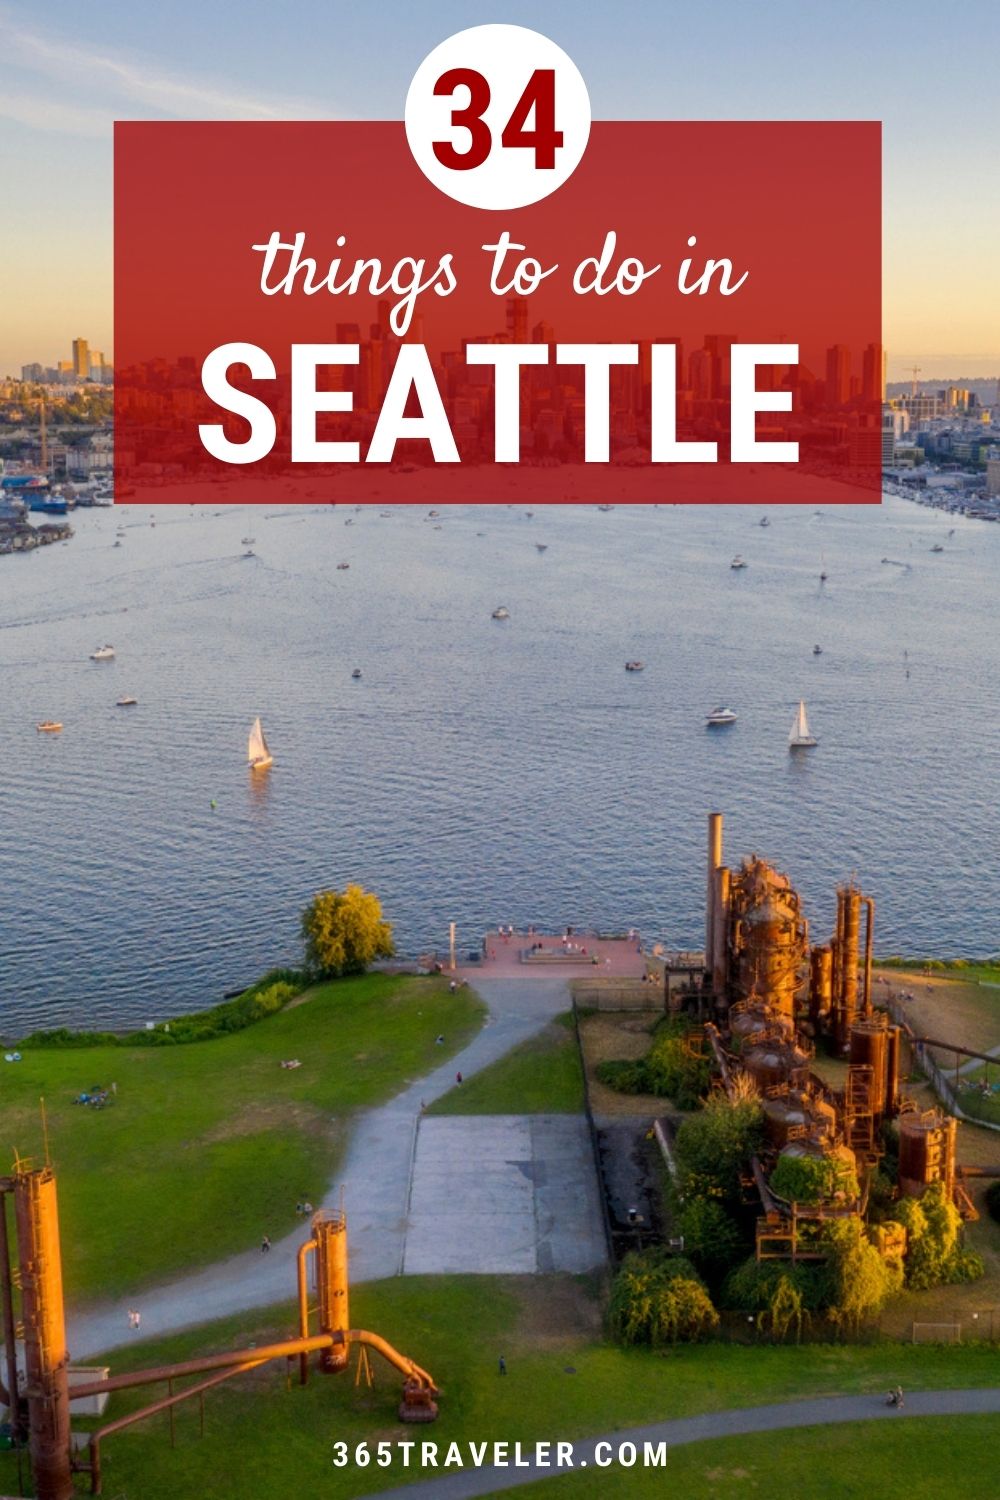 34 AMAZING THINGS TO DO IN SEATTLE YOU'LL LOVE